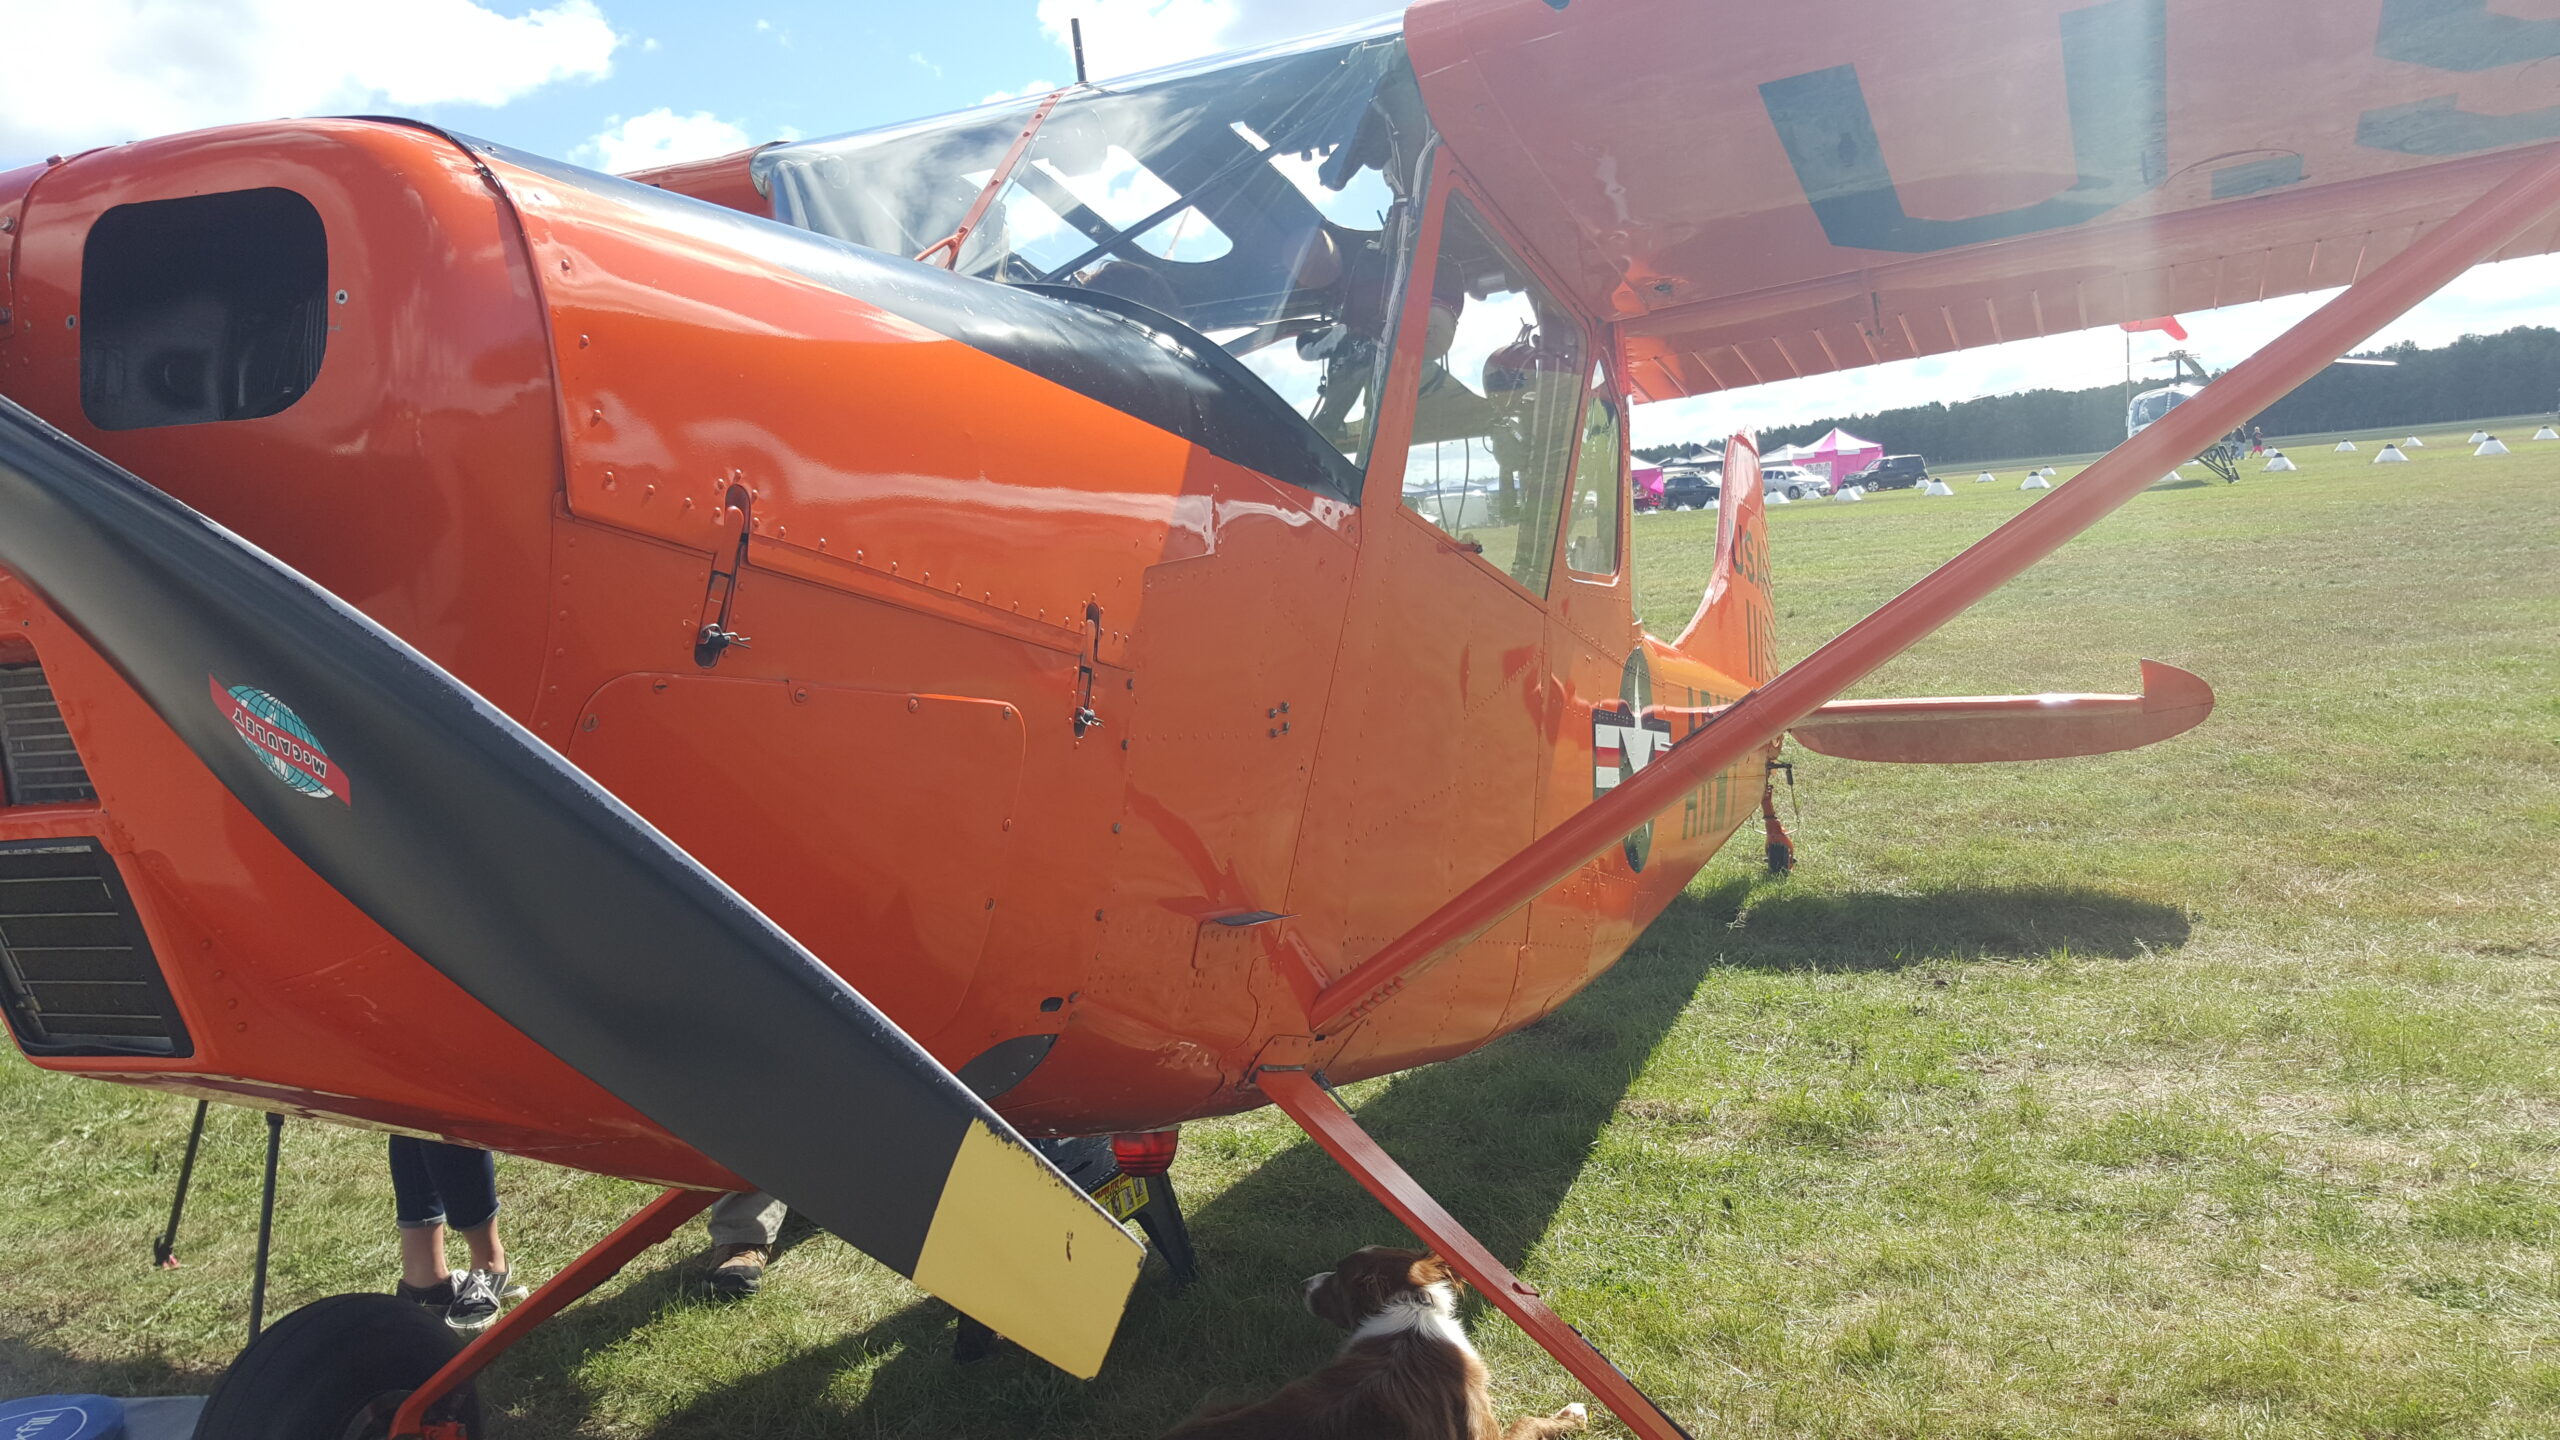 A Closeup Look at a Orange Plane on display on a field, being displayed